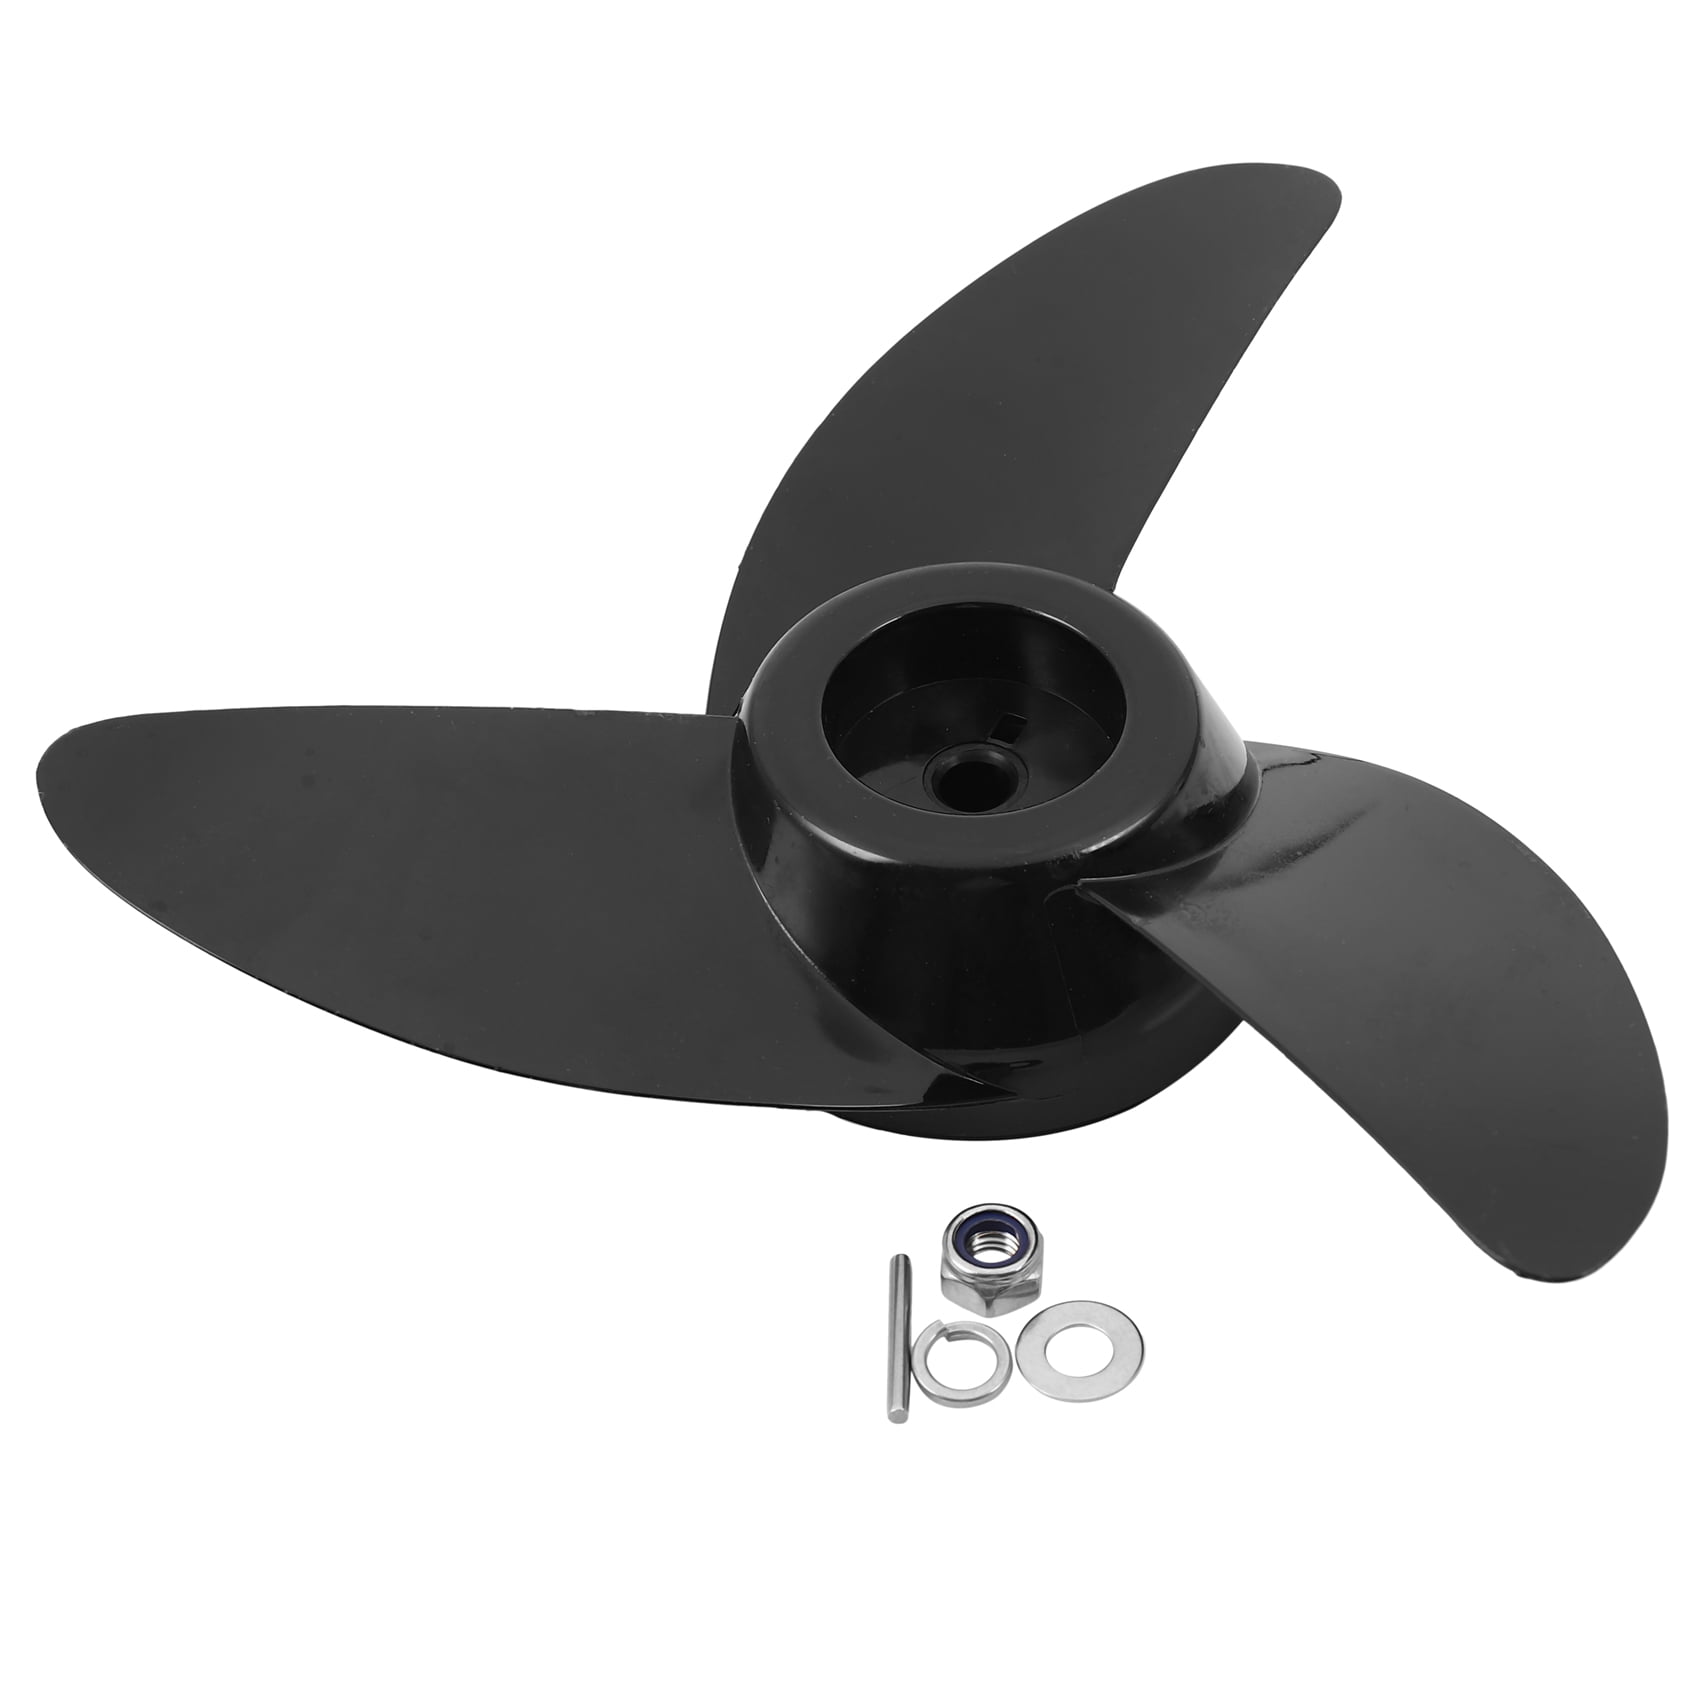 WANGYORTE Performance Propeller Electric Propeller Vpm240300 /Fit For Electric Outboard Engine 28Lbs 34Lbs 44Lbs 54Lbs Color : Black